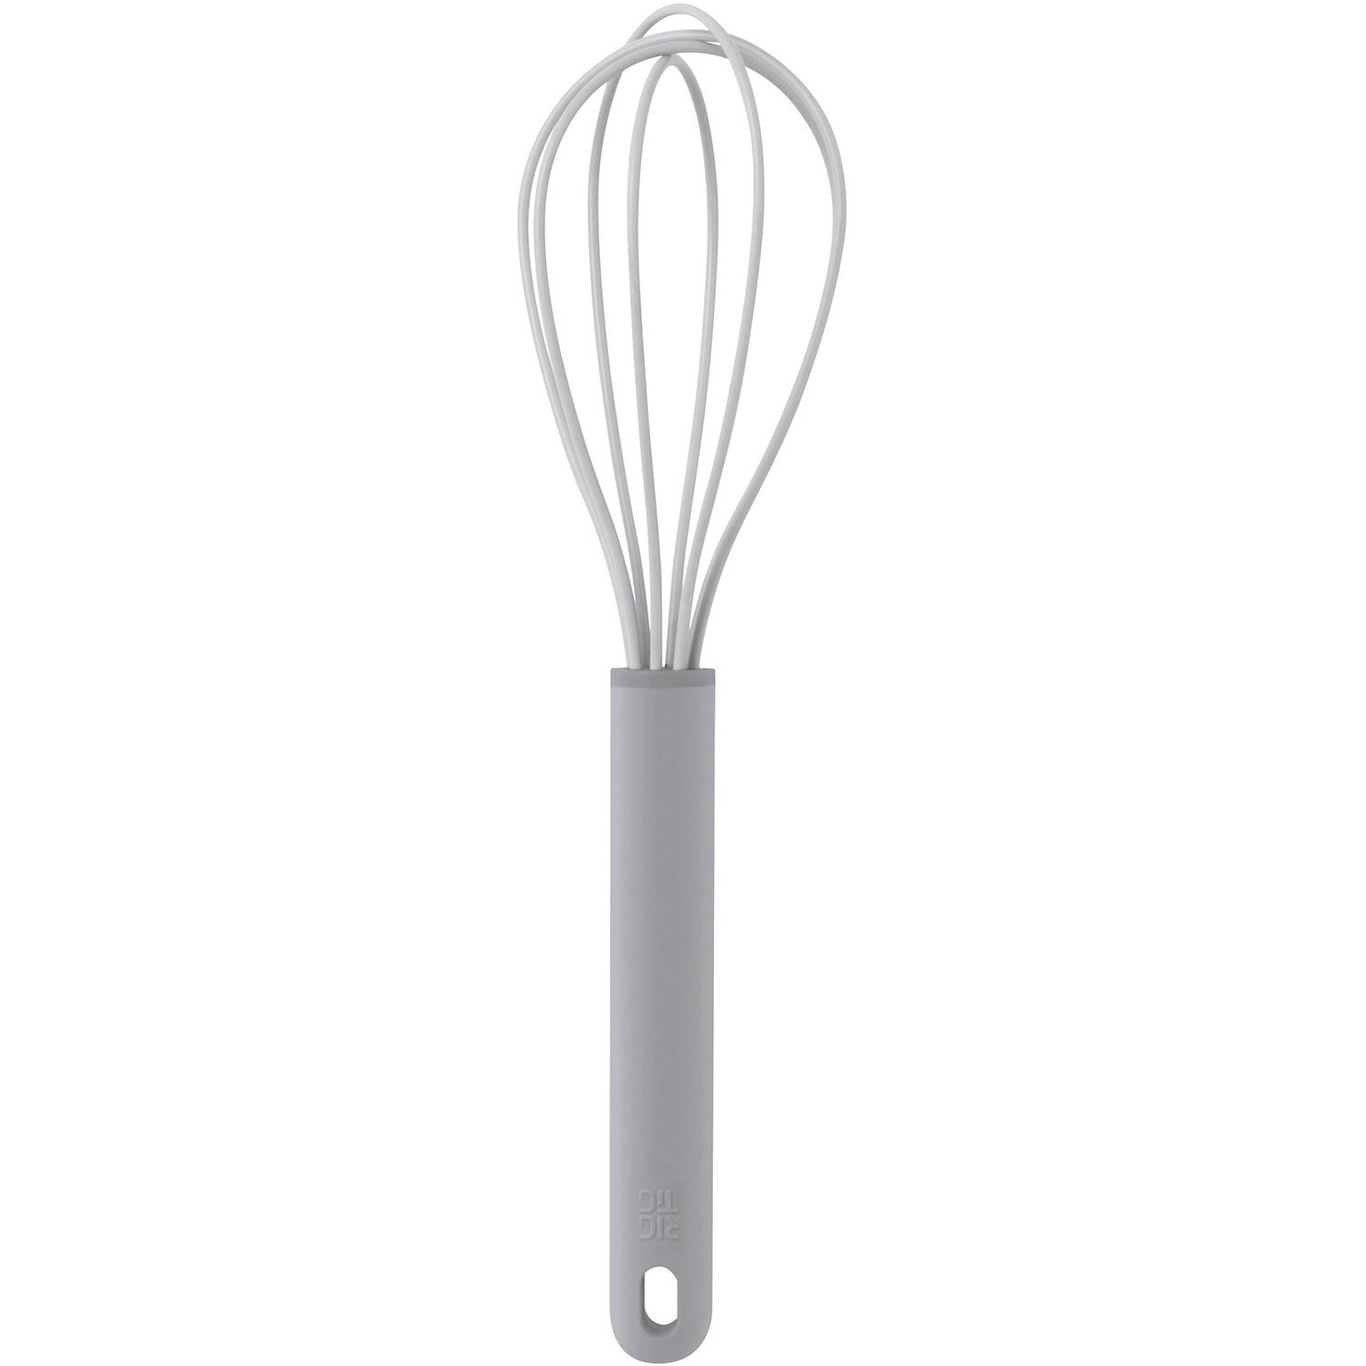 https://royaldesign.com/image/2/rig-tig-by-stelton-cook-it-balloon-whisk-0?w=800&quality=80